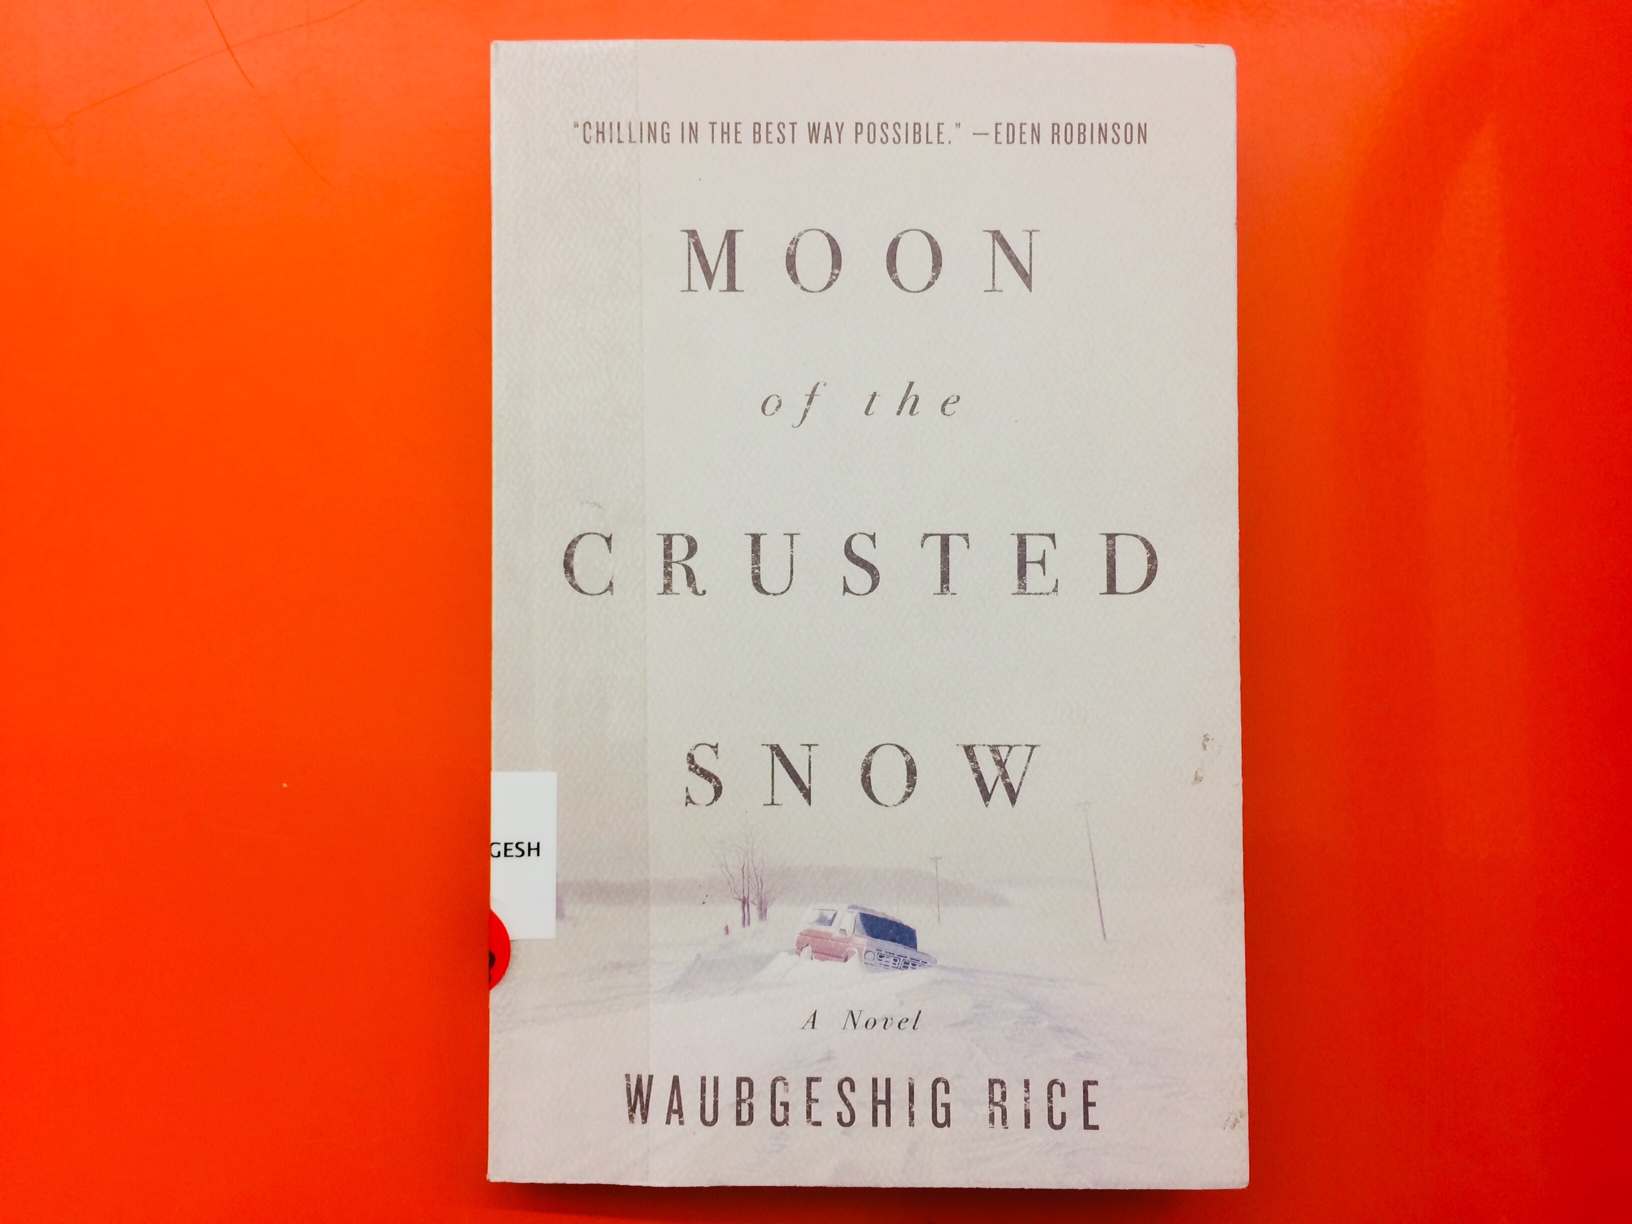 moon of the crusted snow by waubgeshig rice